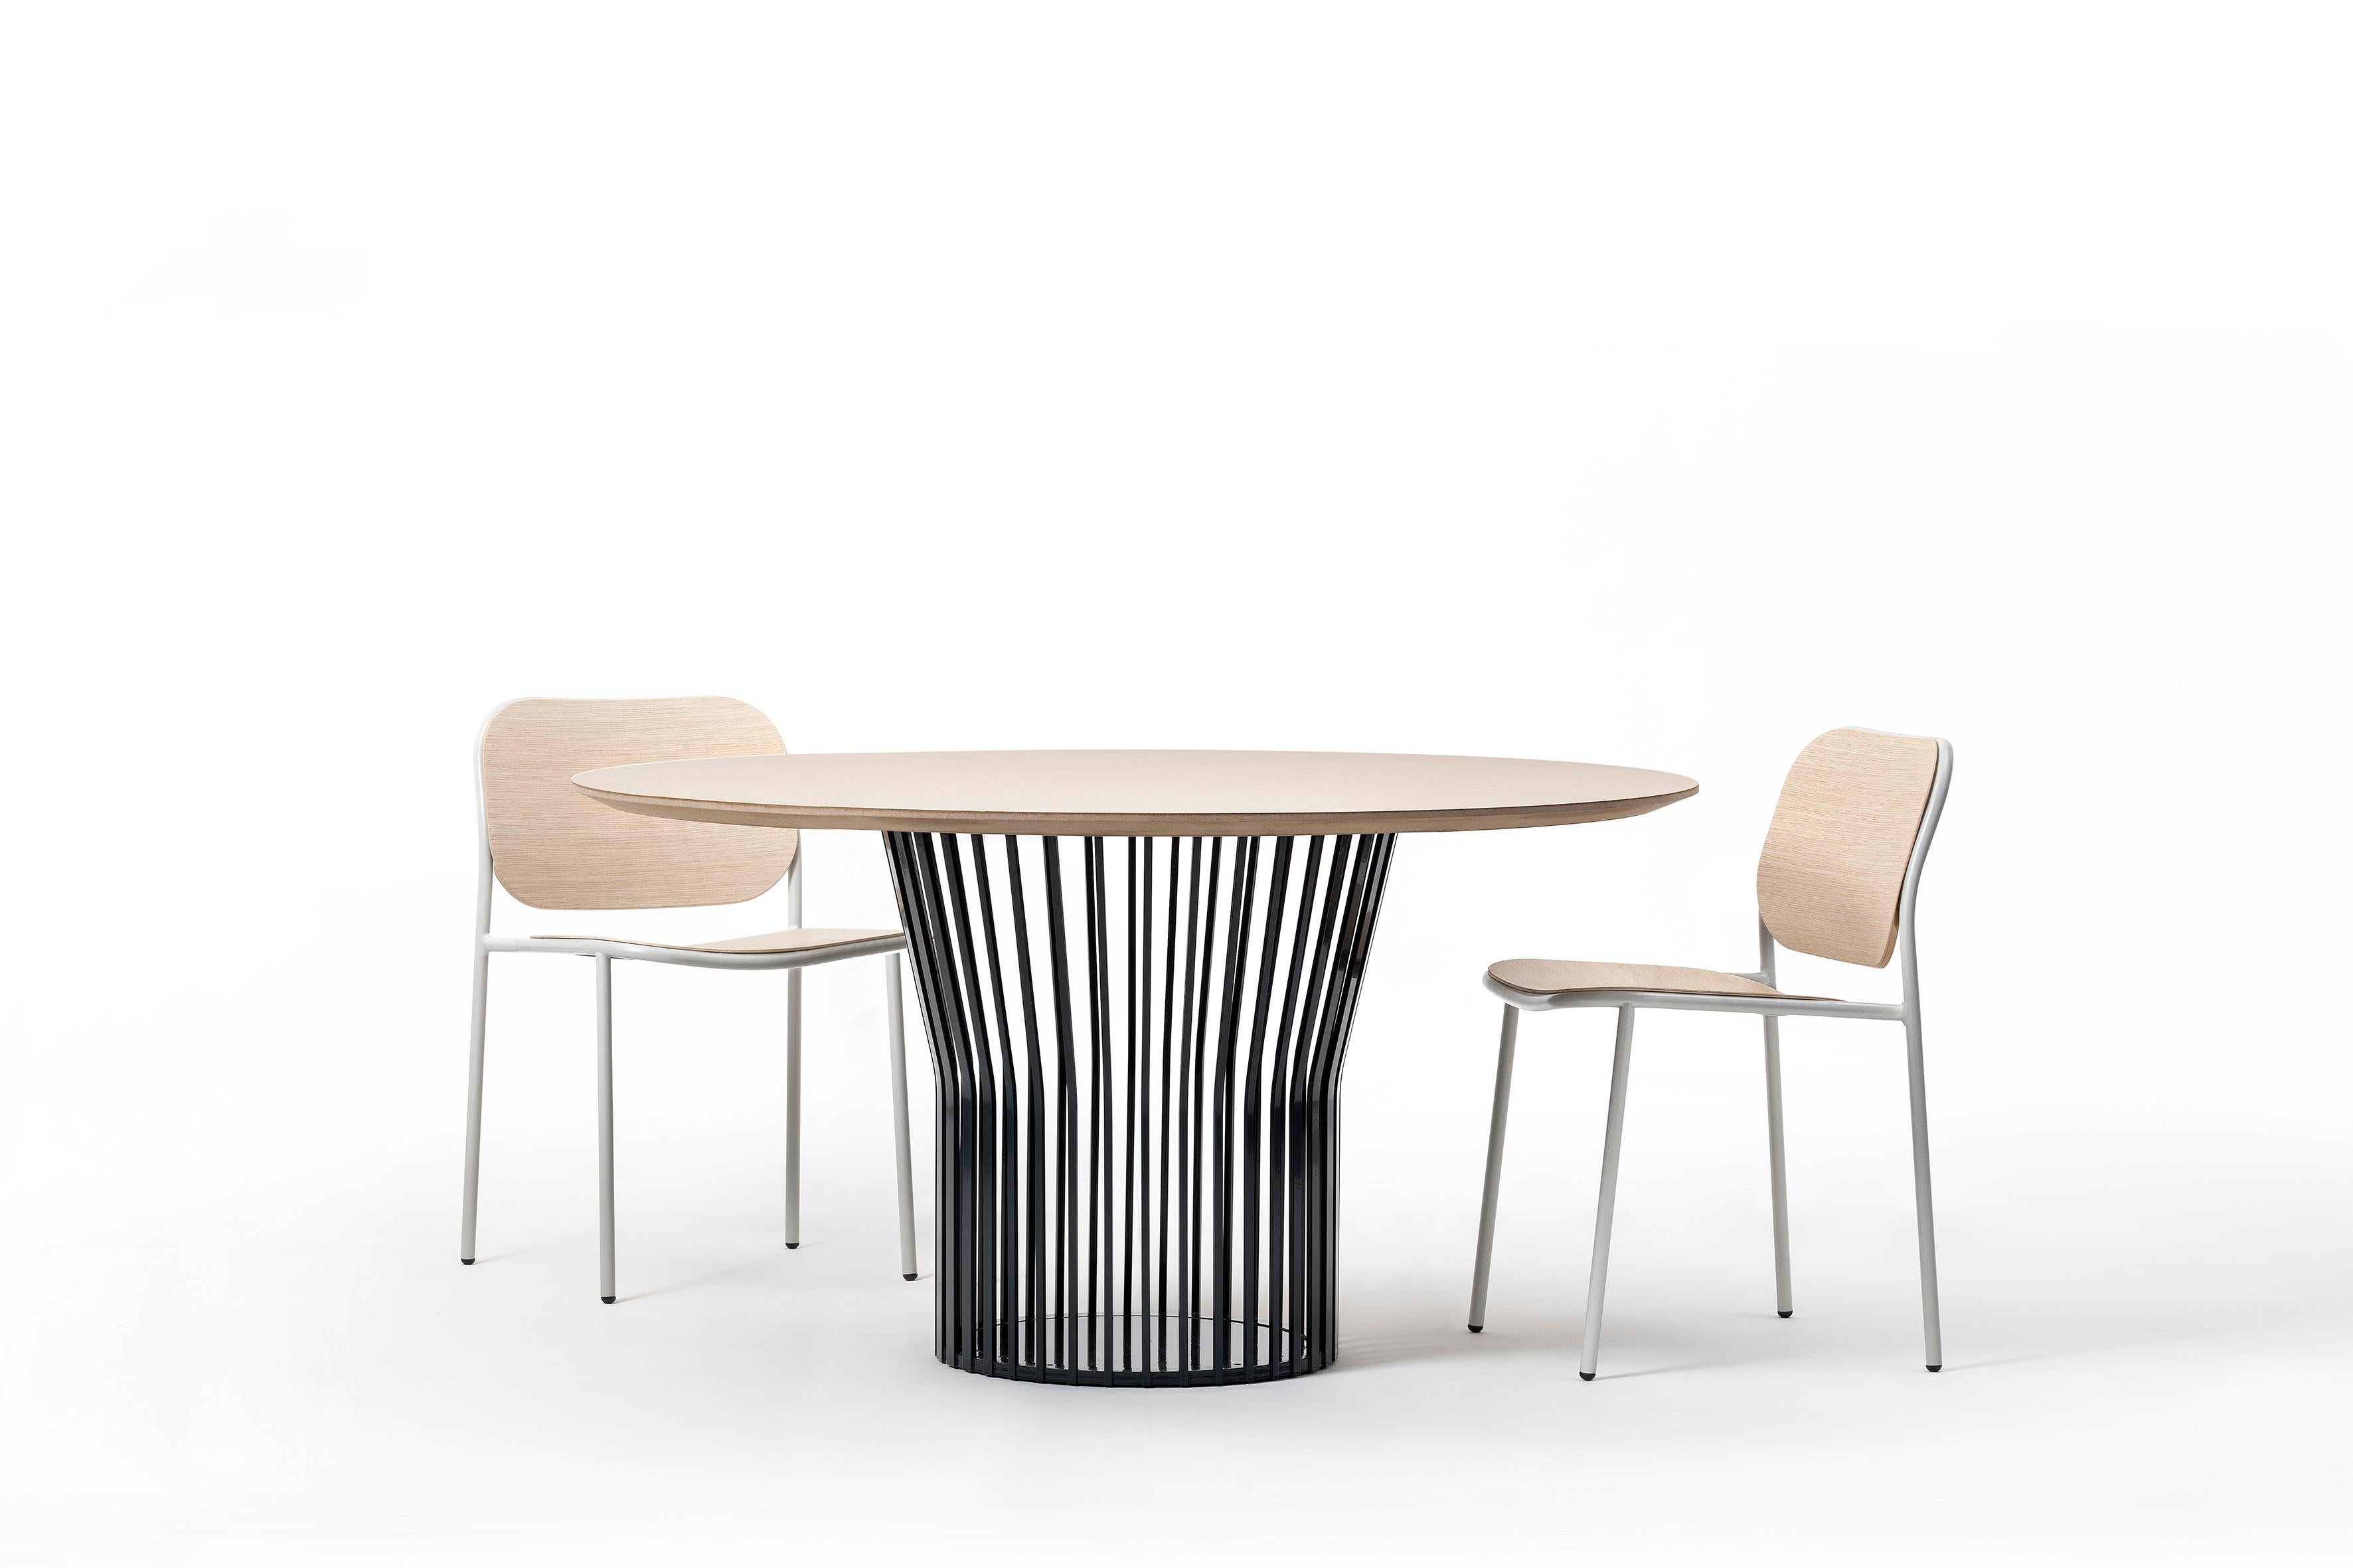 A collection of dining tables in two shapes, multiple sizes and multiple finishes to fit into all types of domestic or contract spaces and harmonize with the style of the environment. The metal base with an original and dynamic design is made up of